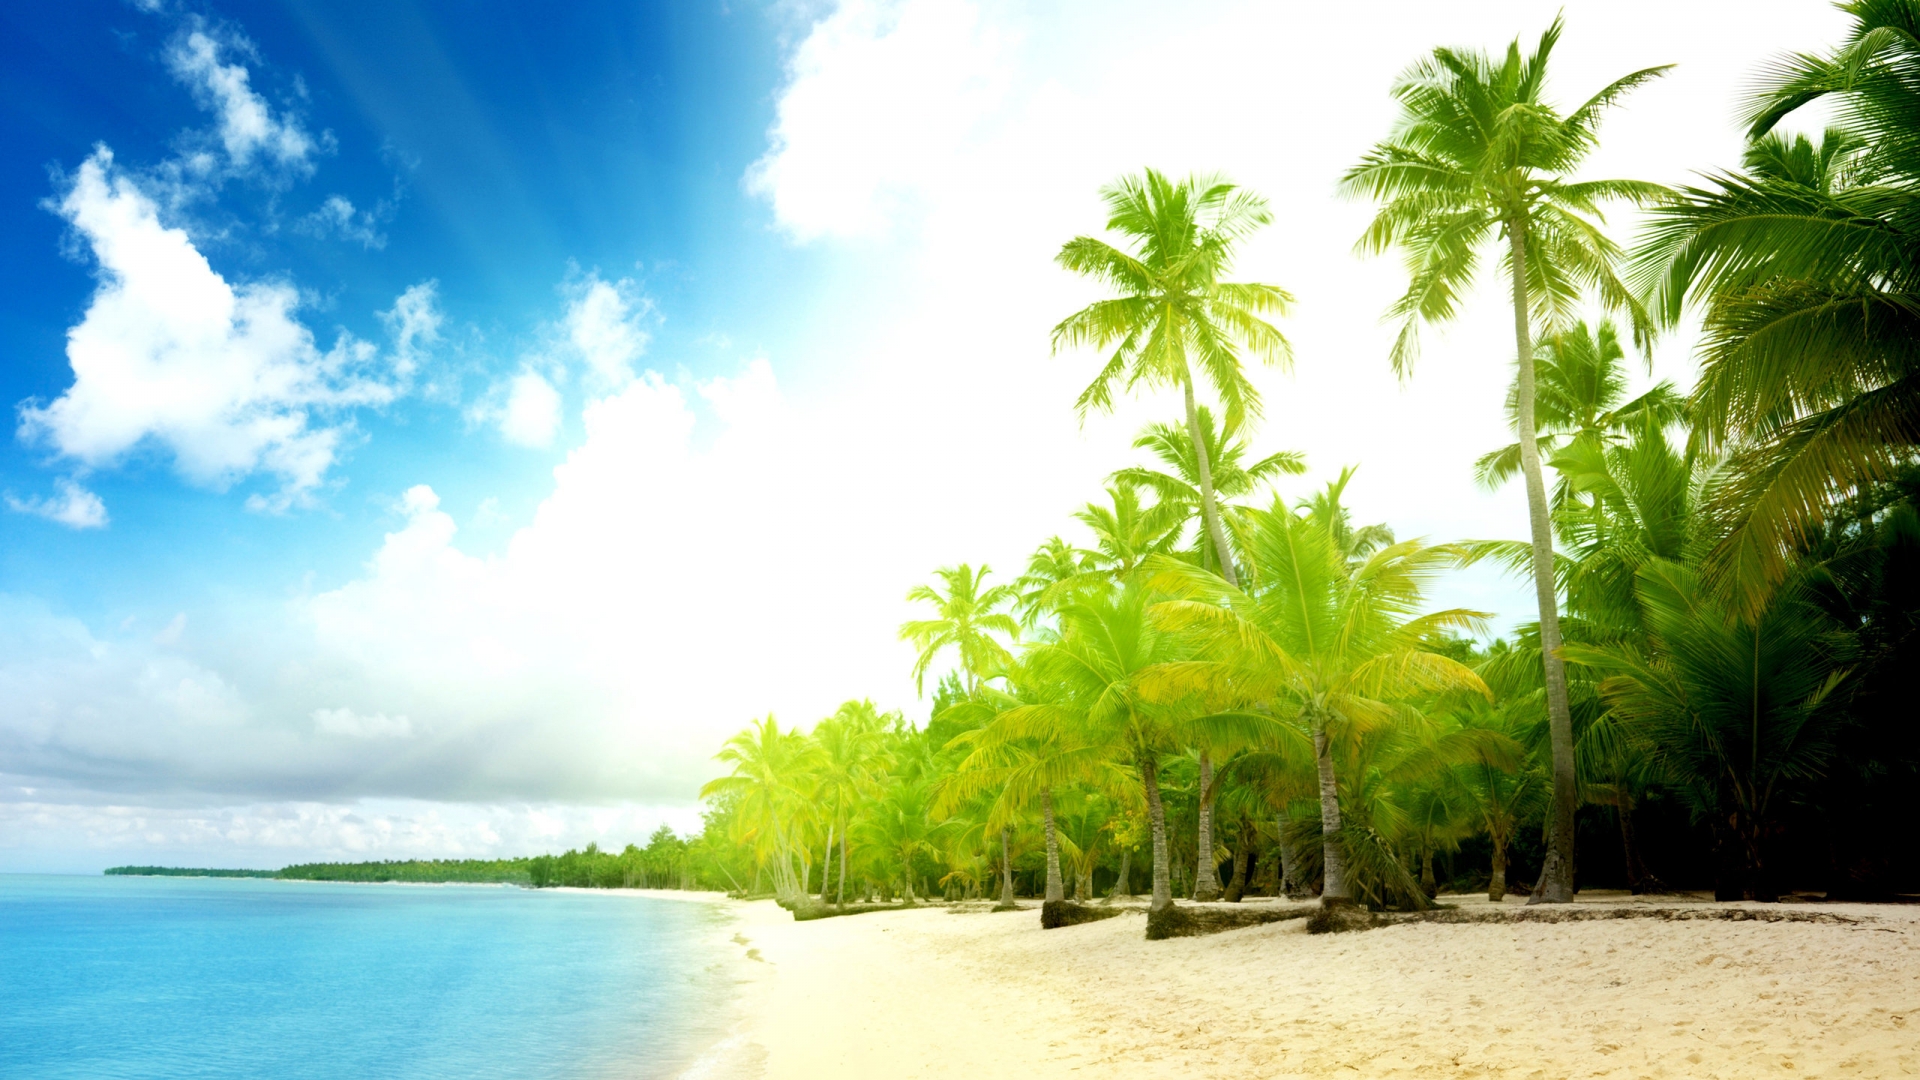 Amazing Exotic beach for 1920 x 1080 HDTV 1080p resolution